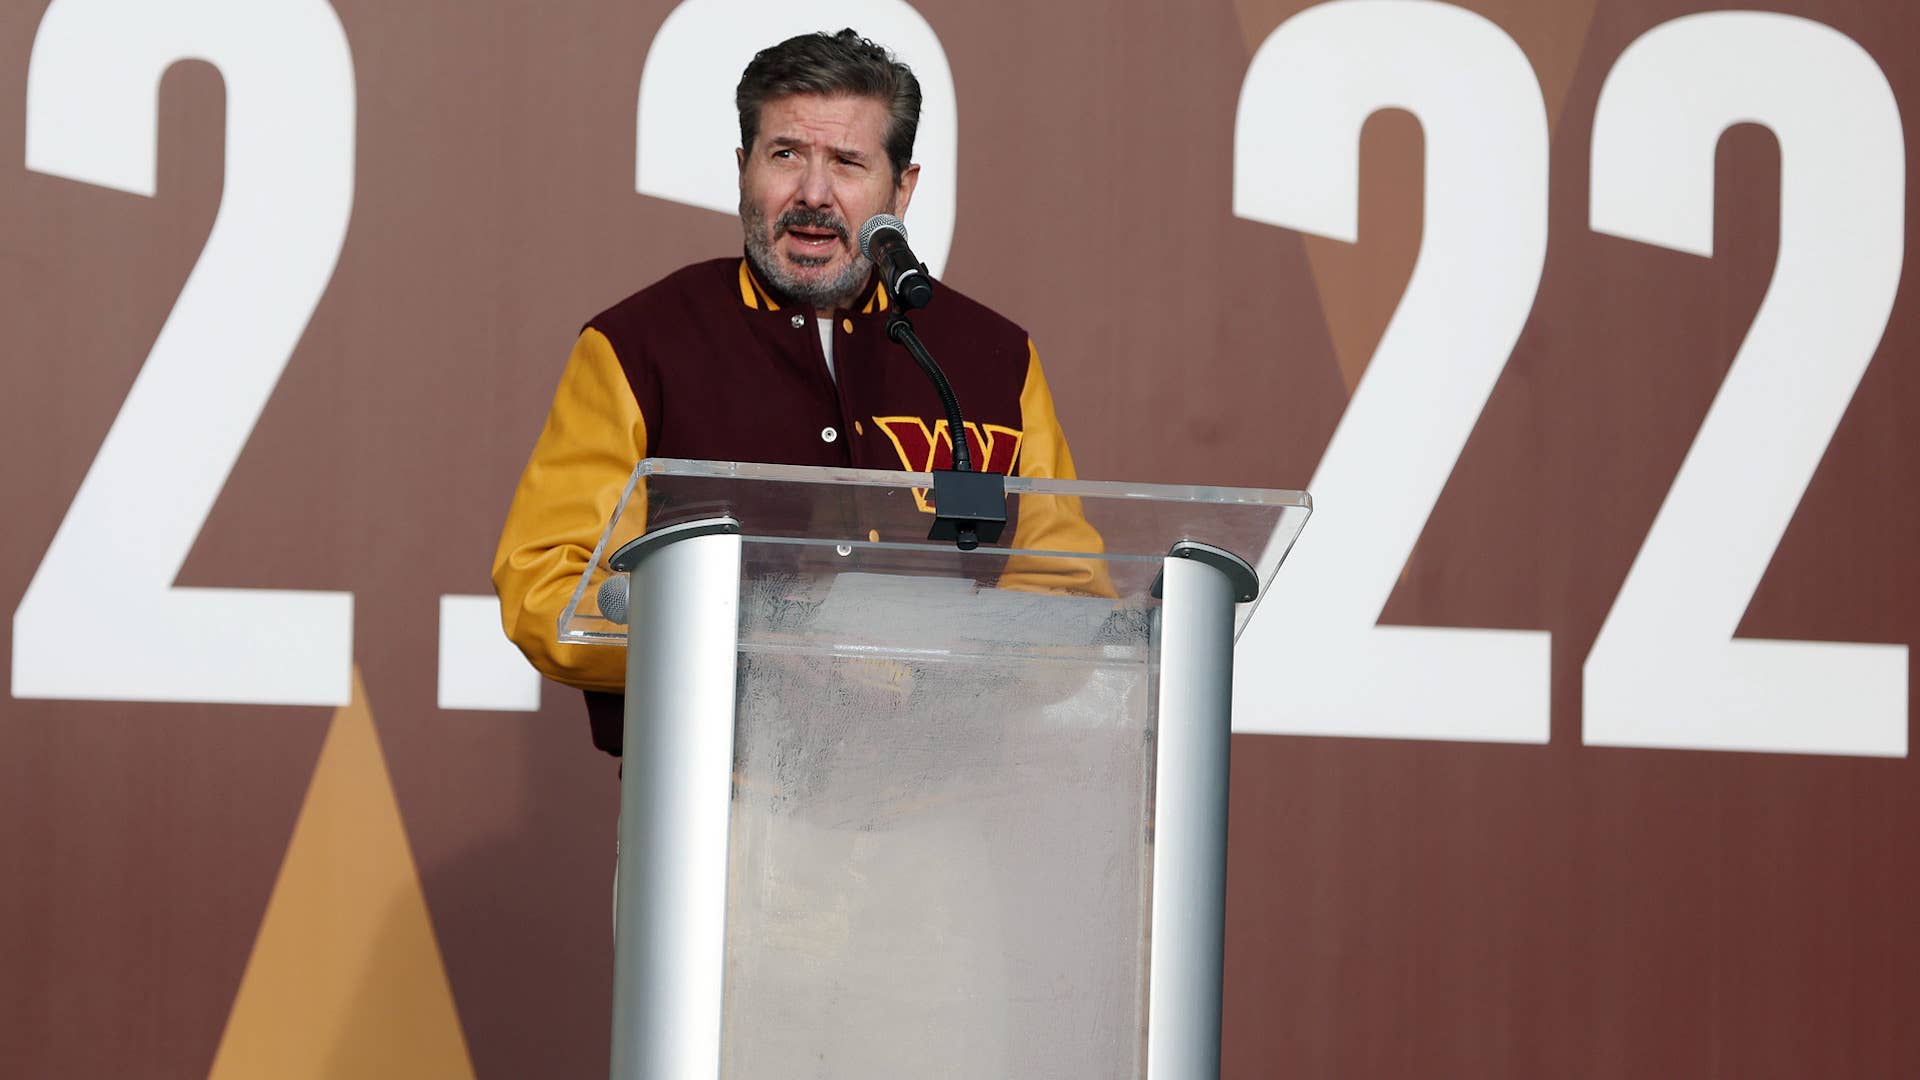 eam co-owner Dan Snyder speaks during the announcement of the Washington Football Team's name change